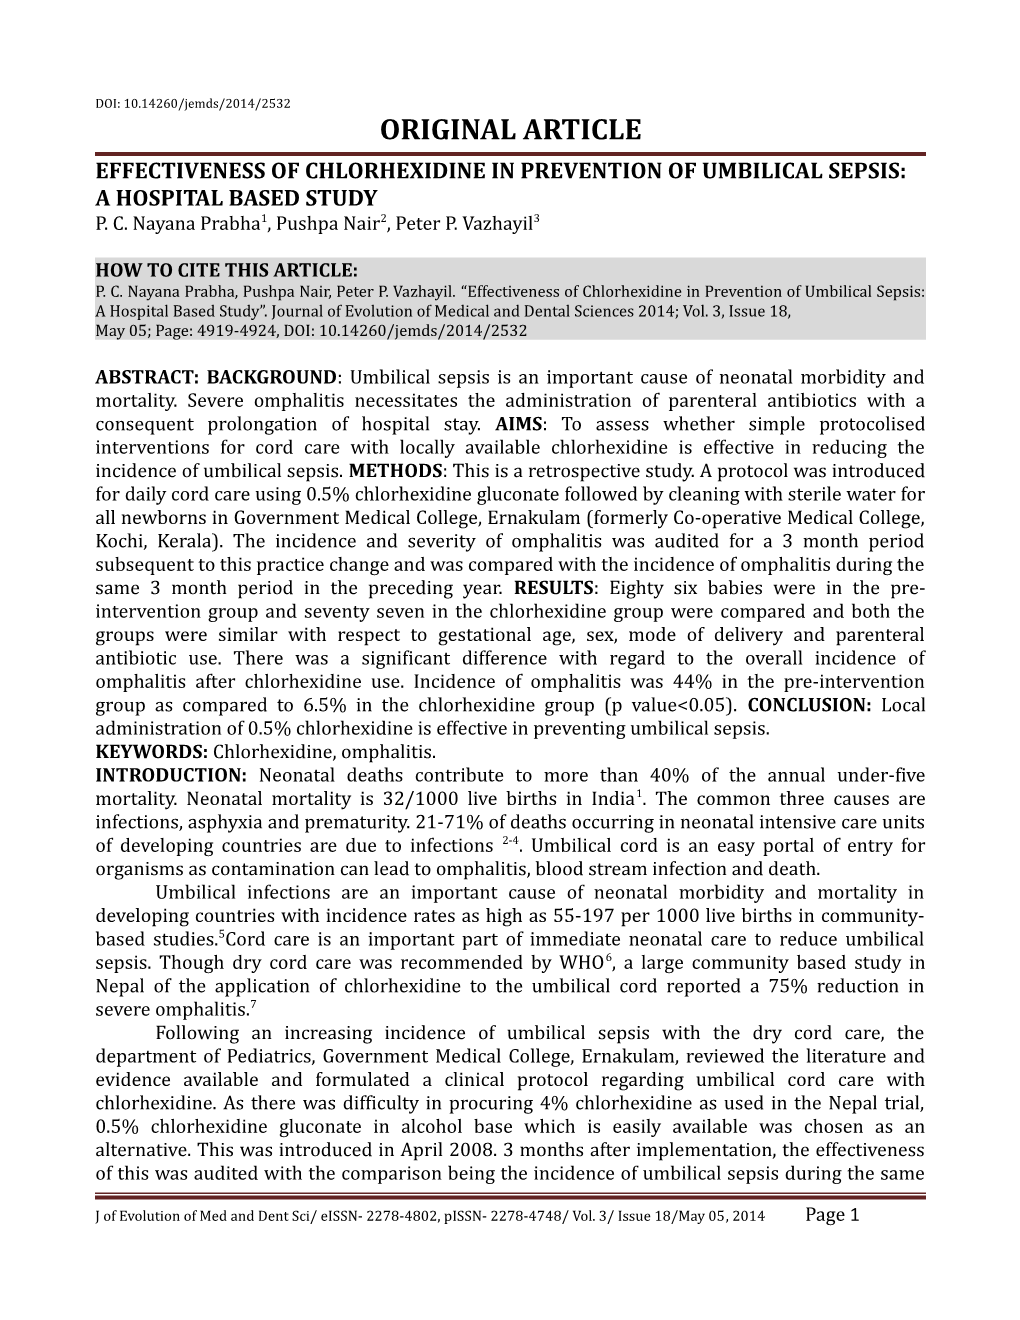 Effectiveness of Chlorhexidine in Prevention of Umbilical Sepsis: a Hospital Based Study